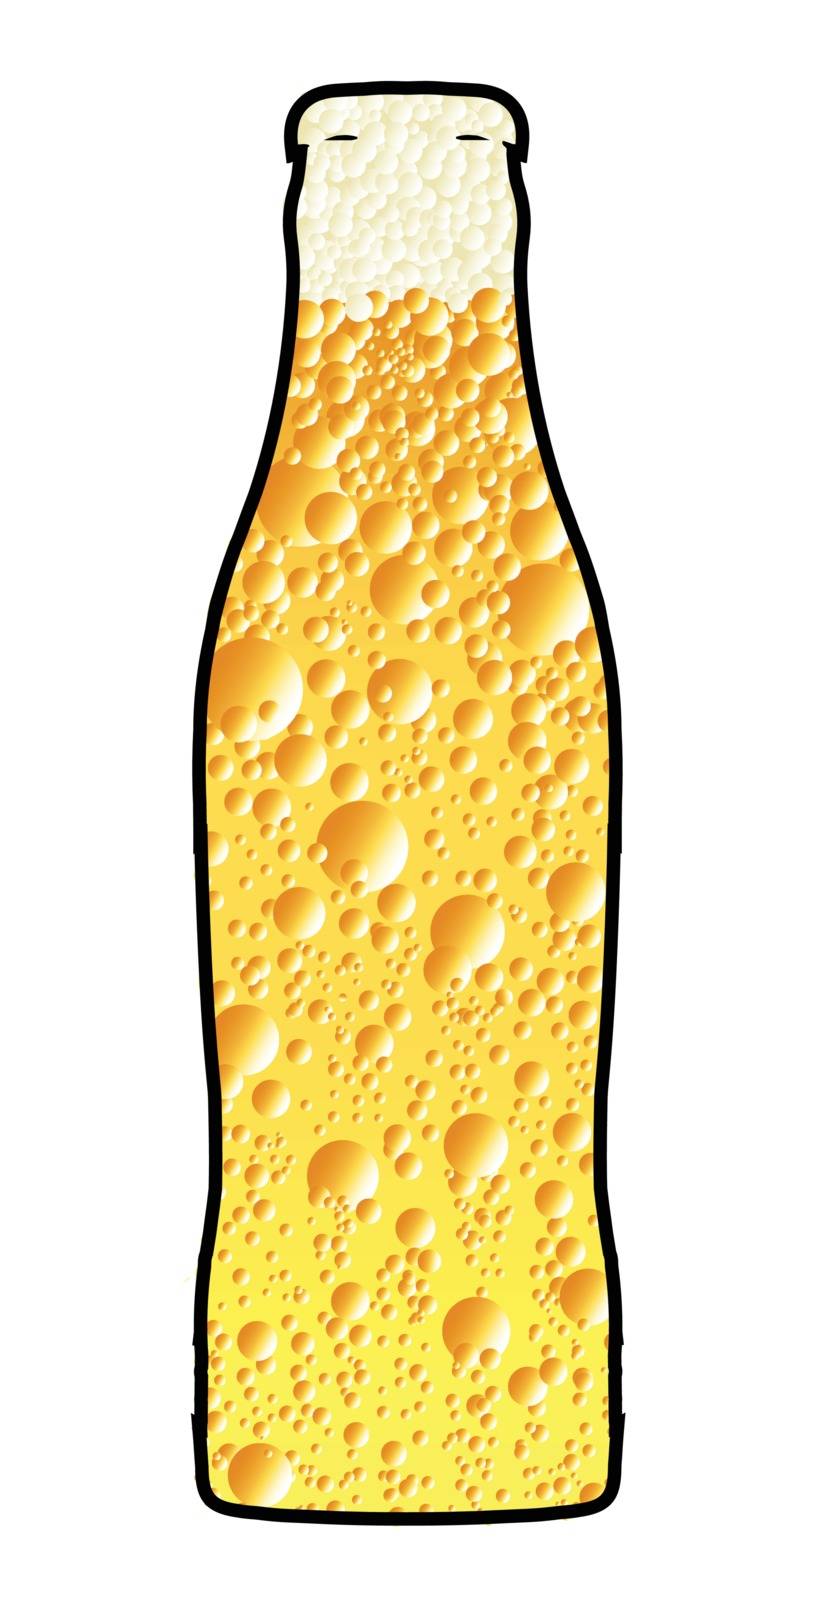 Bubbles and froth in a fizzy drink bottle over a white background.